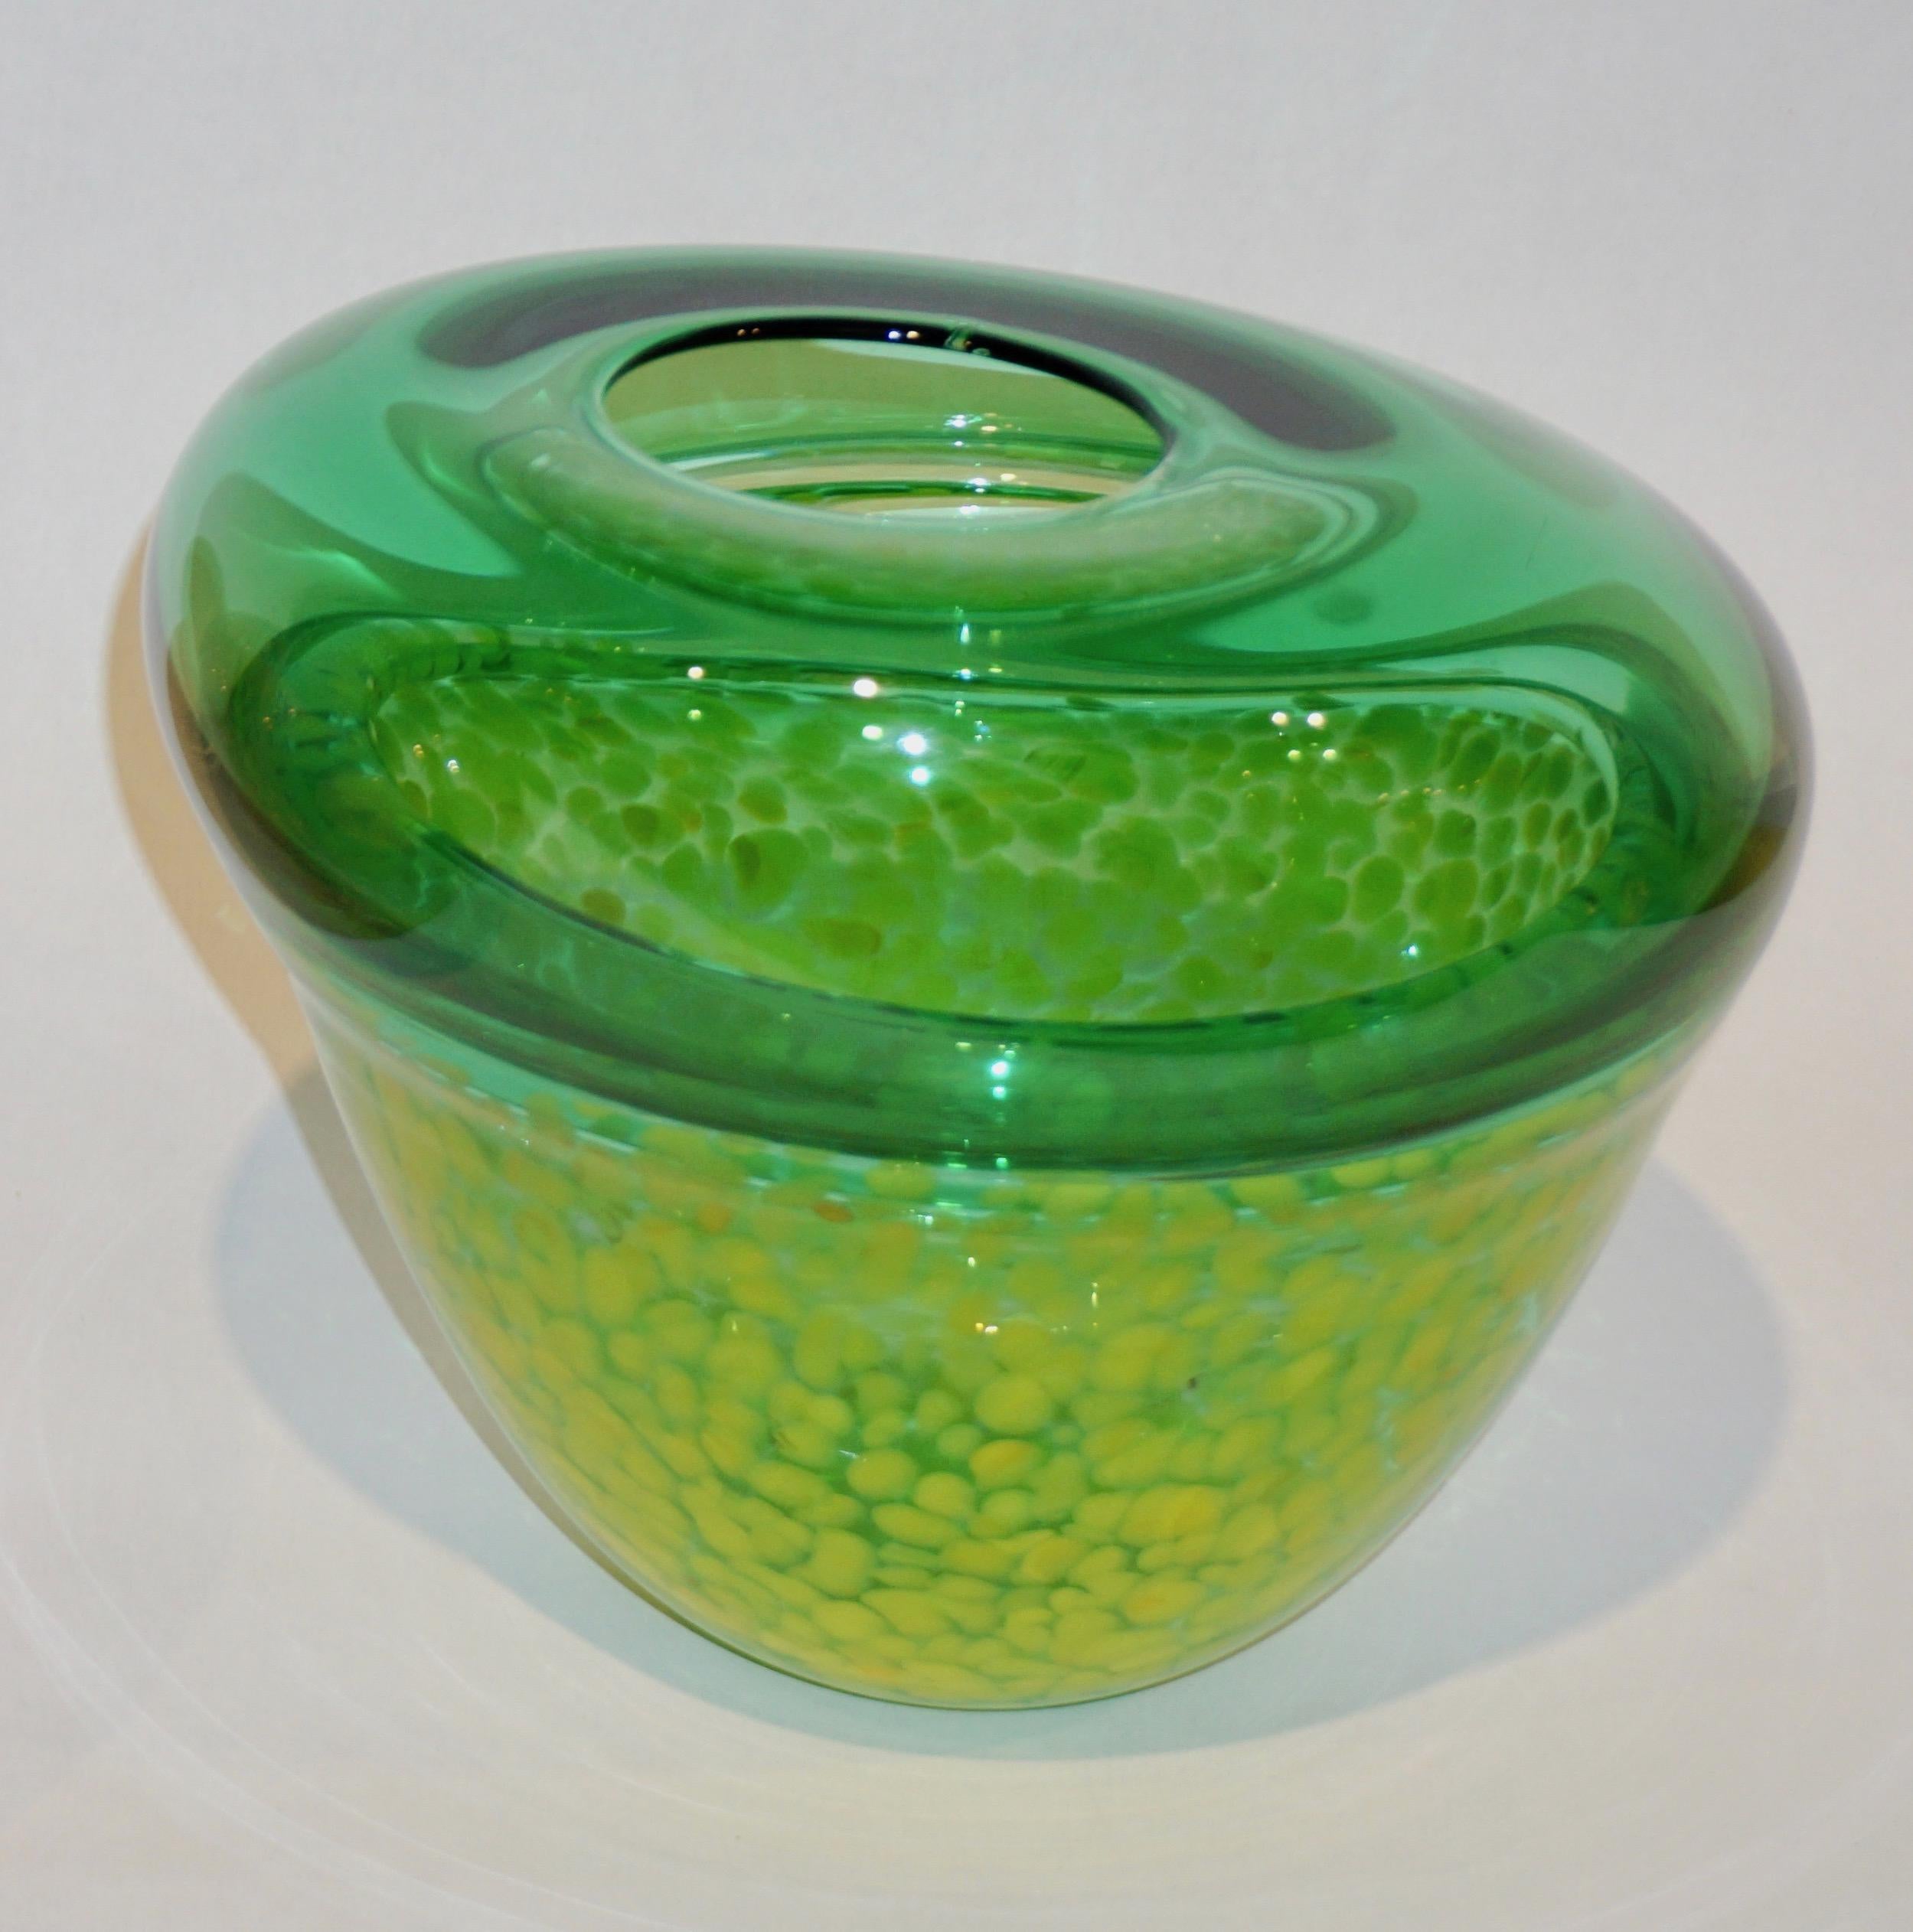 Hilton McConnico by Formia 1990s Italian Green Spotted Murano Art Glass Vase 4